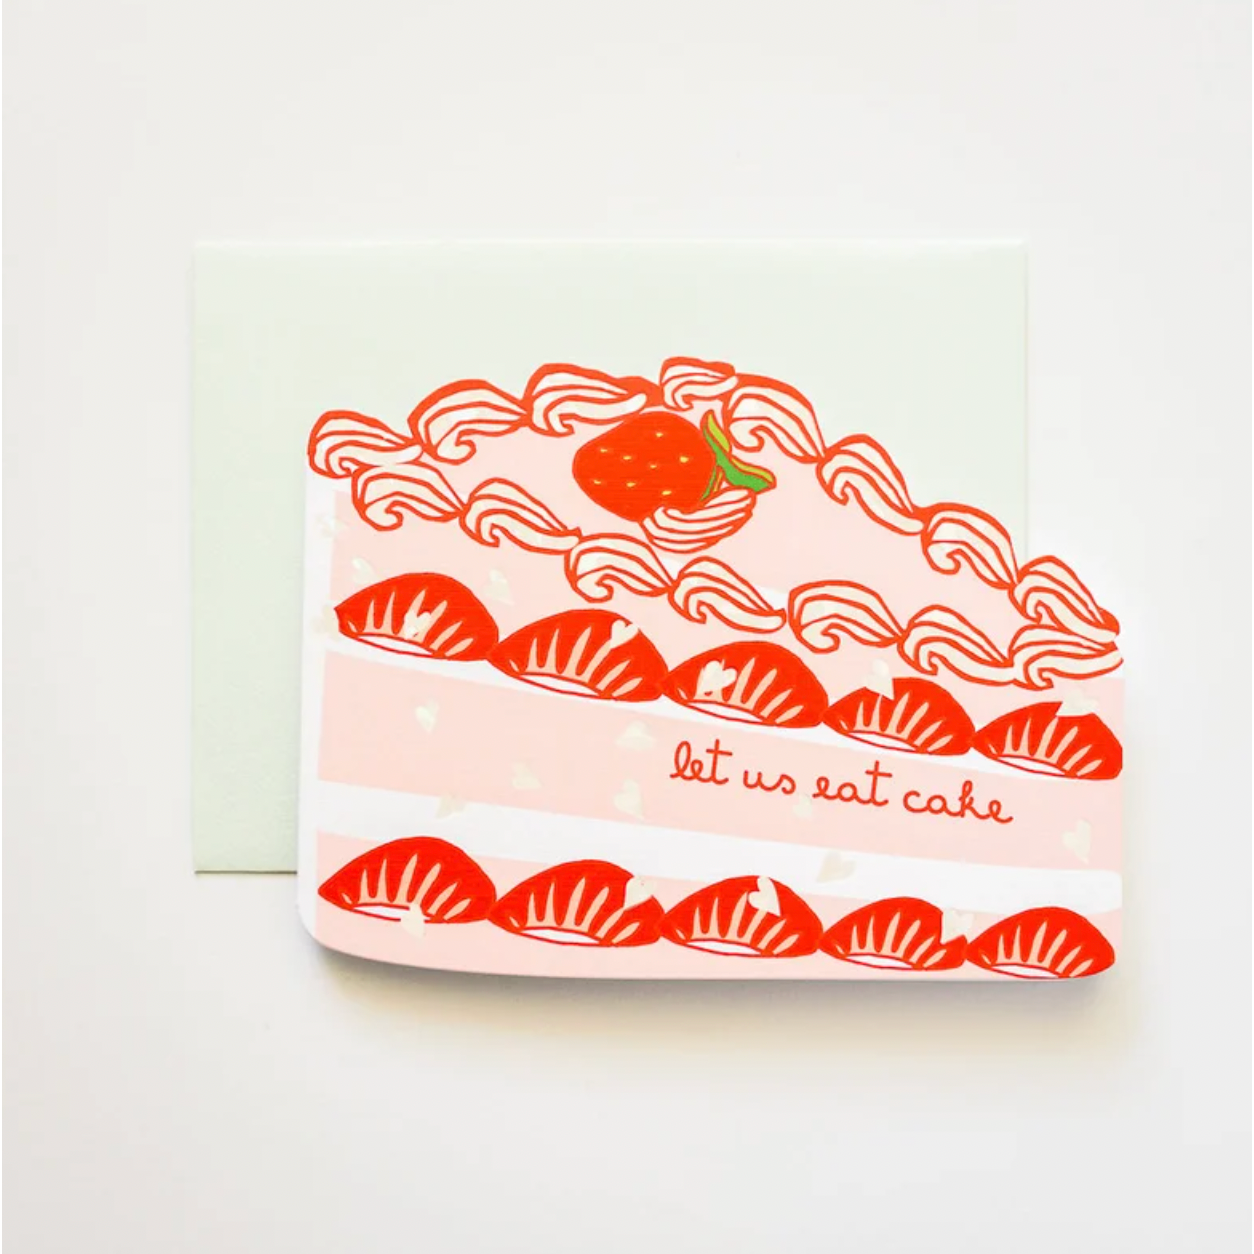 Let Us Eat Cake! Die Cut Congratulations and/or Birthday Greeting Card